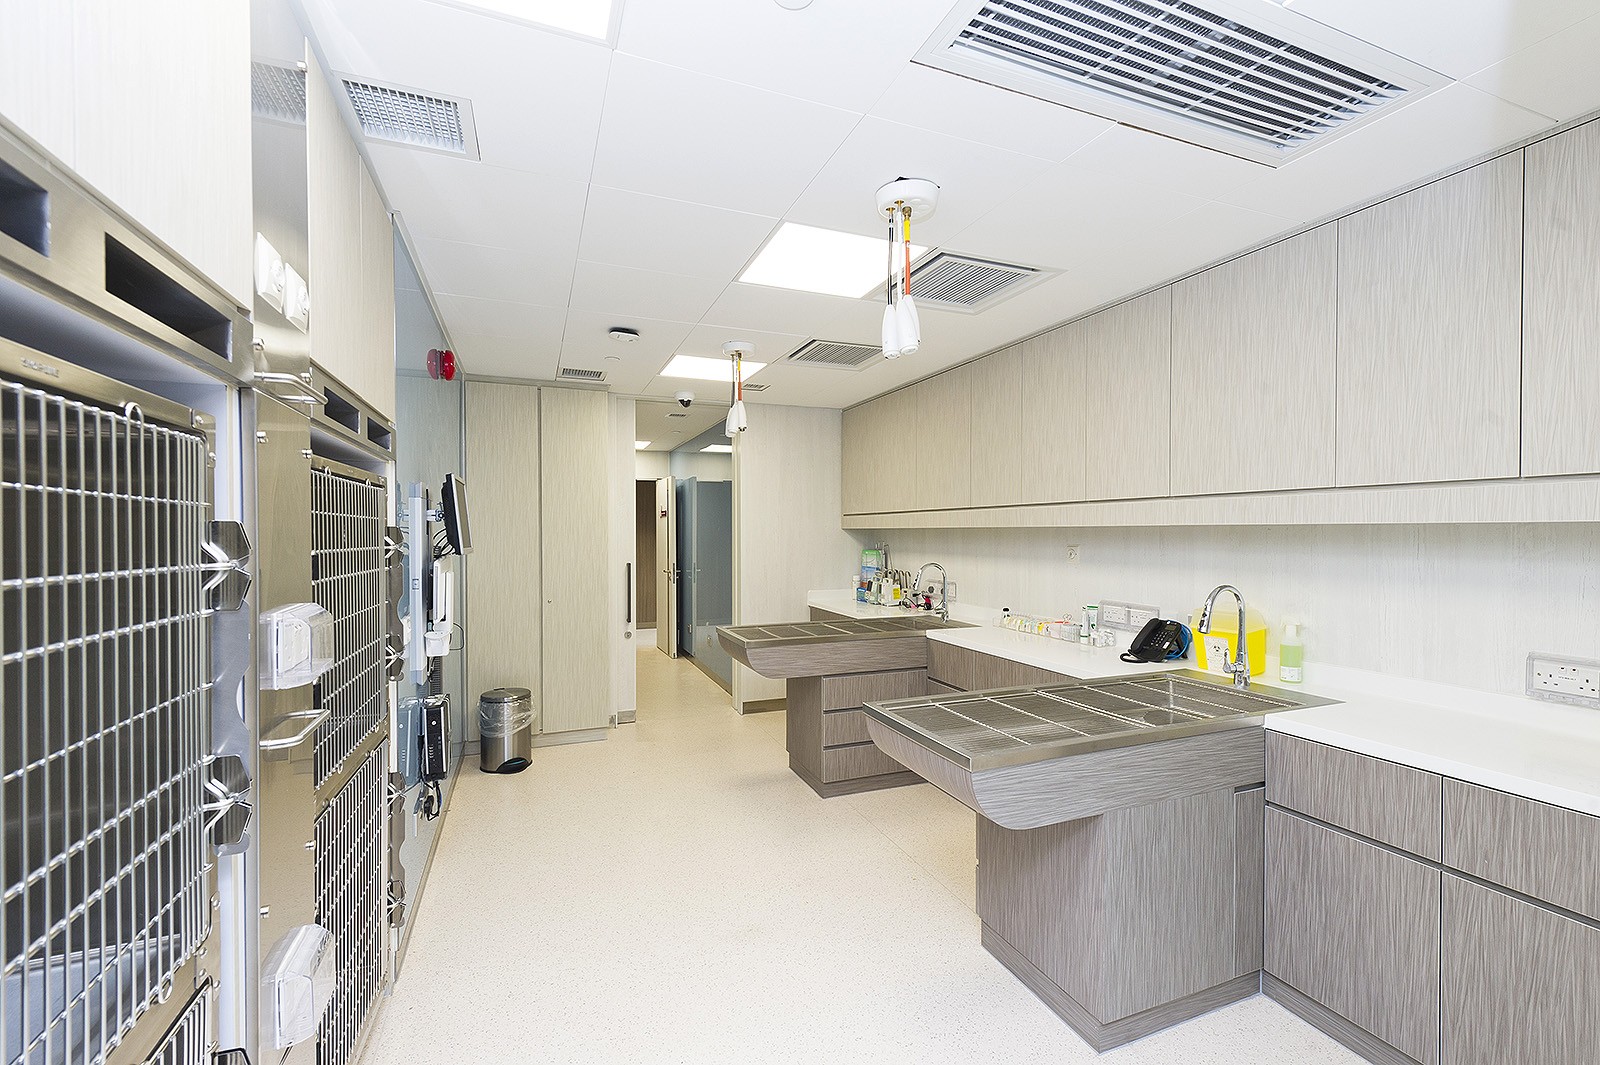 The wards are carefully designed to cater for the needs of hospitalised animals.